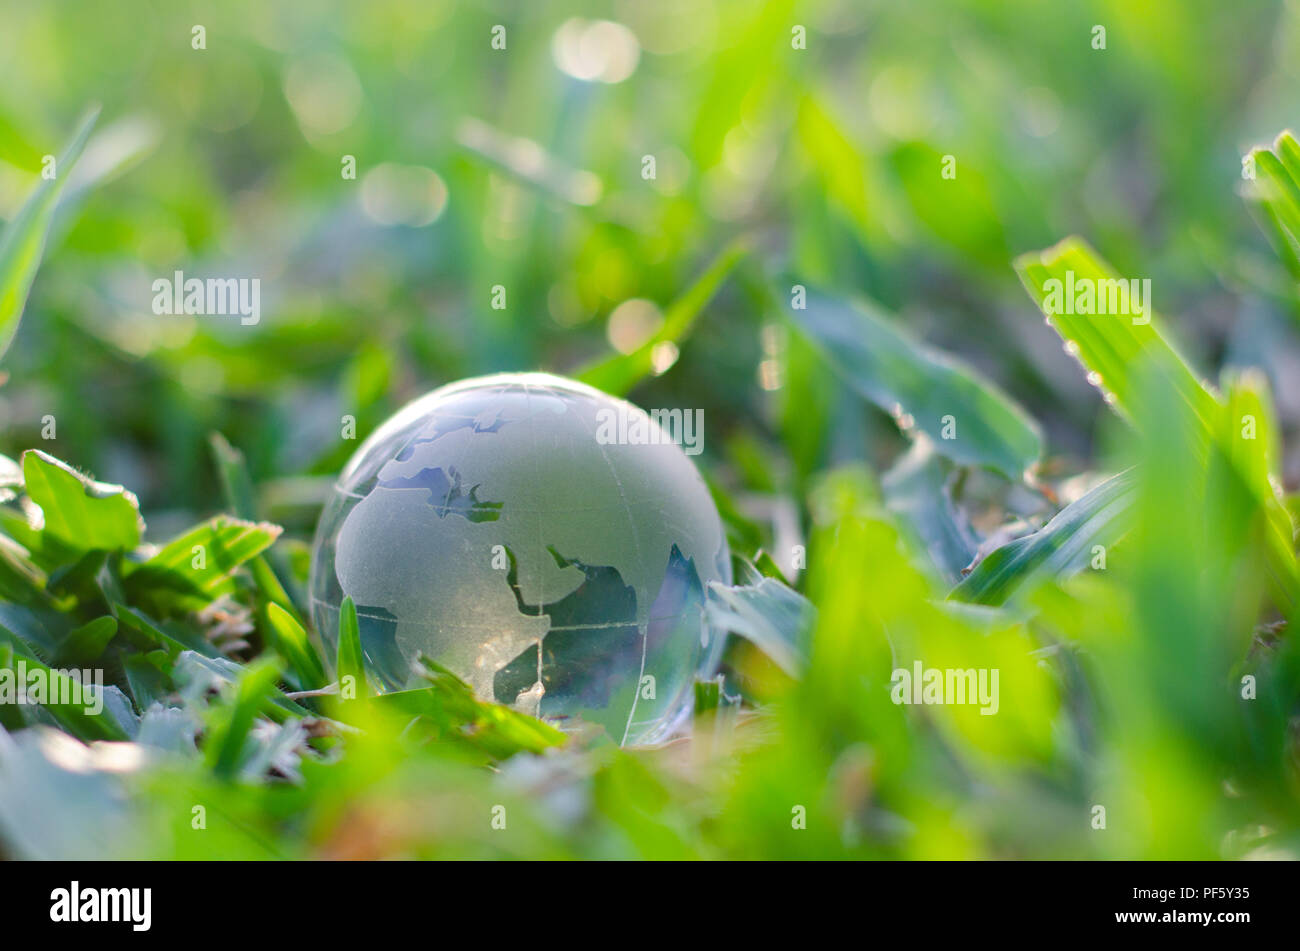 Concept Save the world save environment The world is in the grass of the green bokeh background Stock Photo